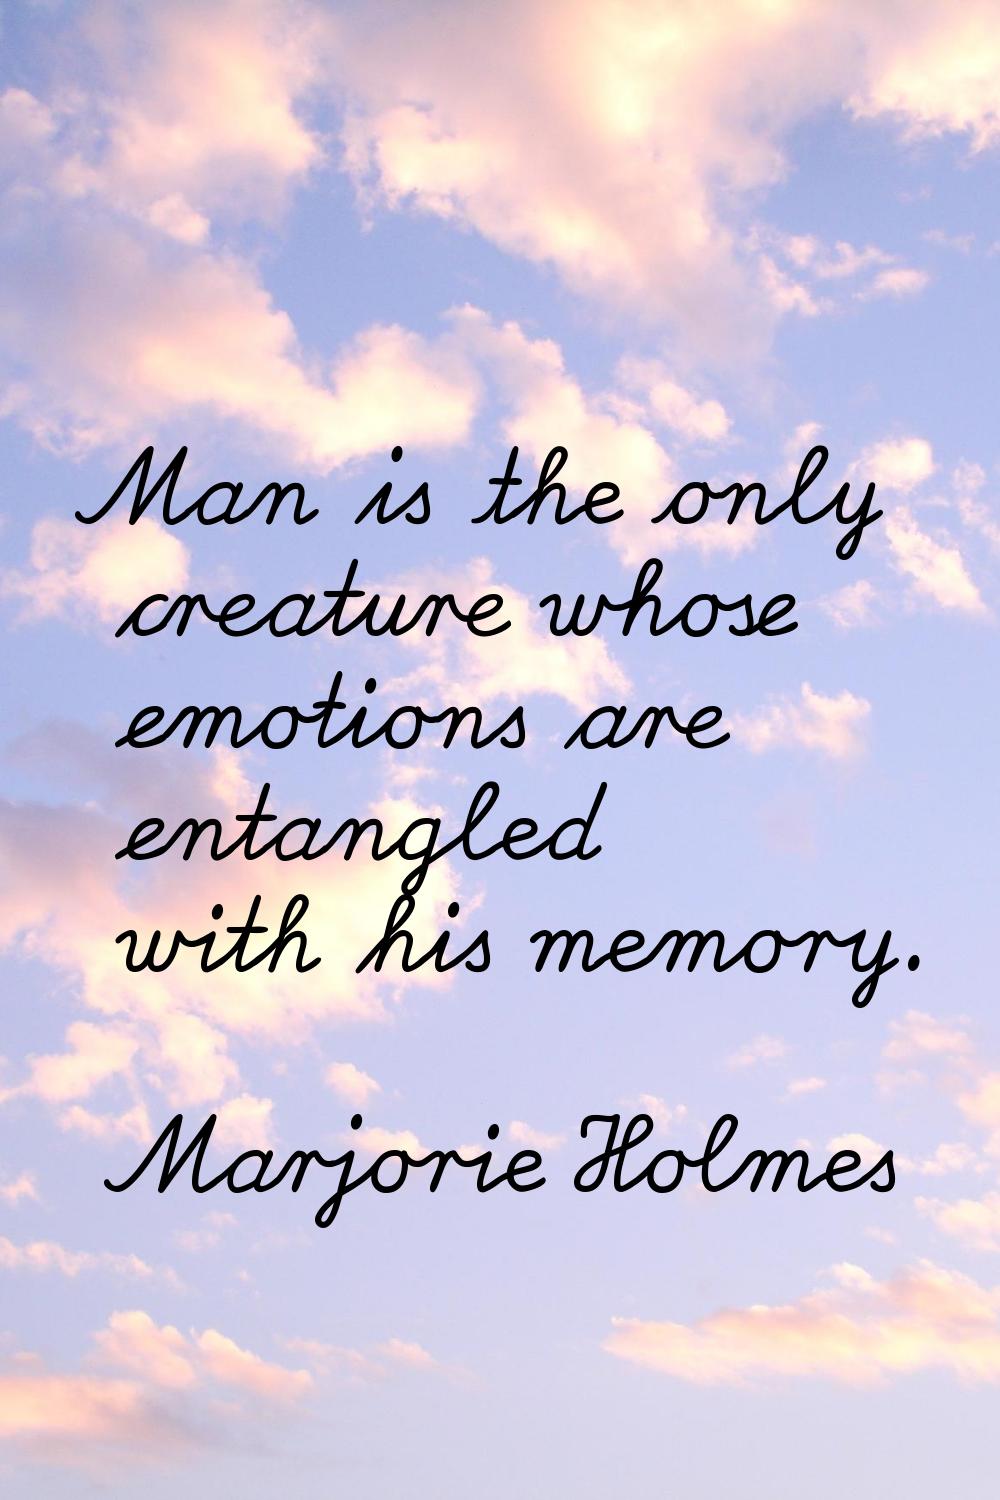 Man is the only creature whose emotions are entangled with his memory.